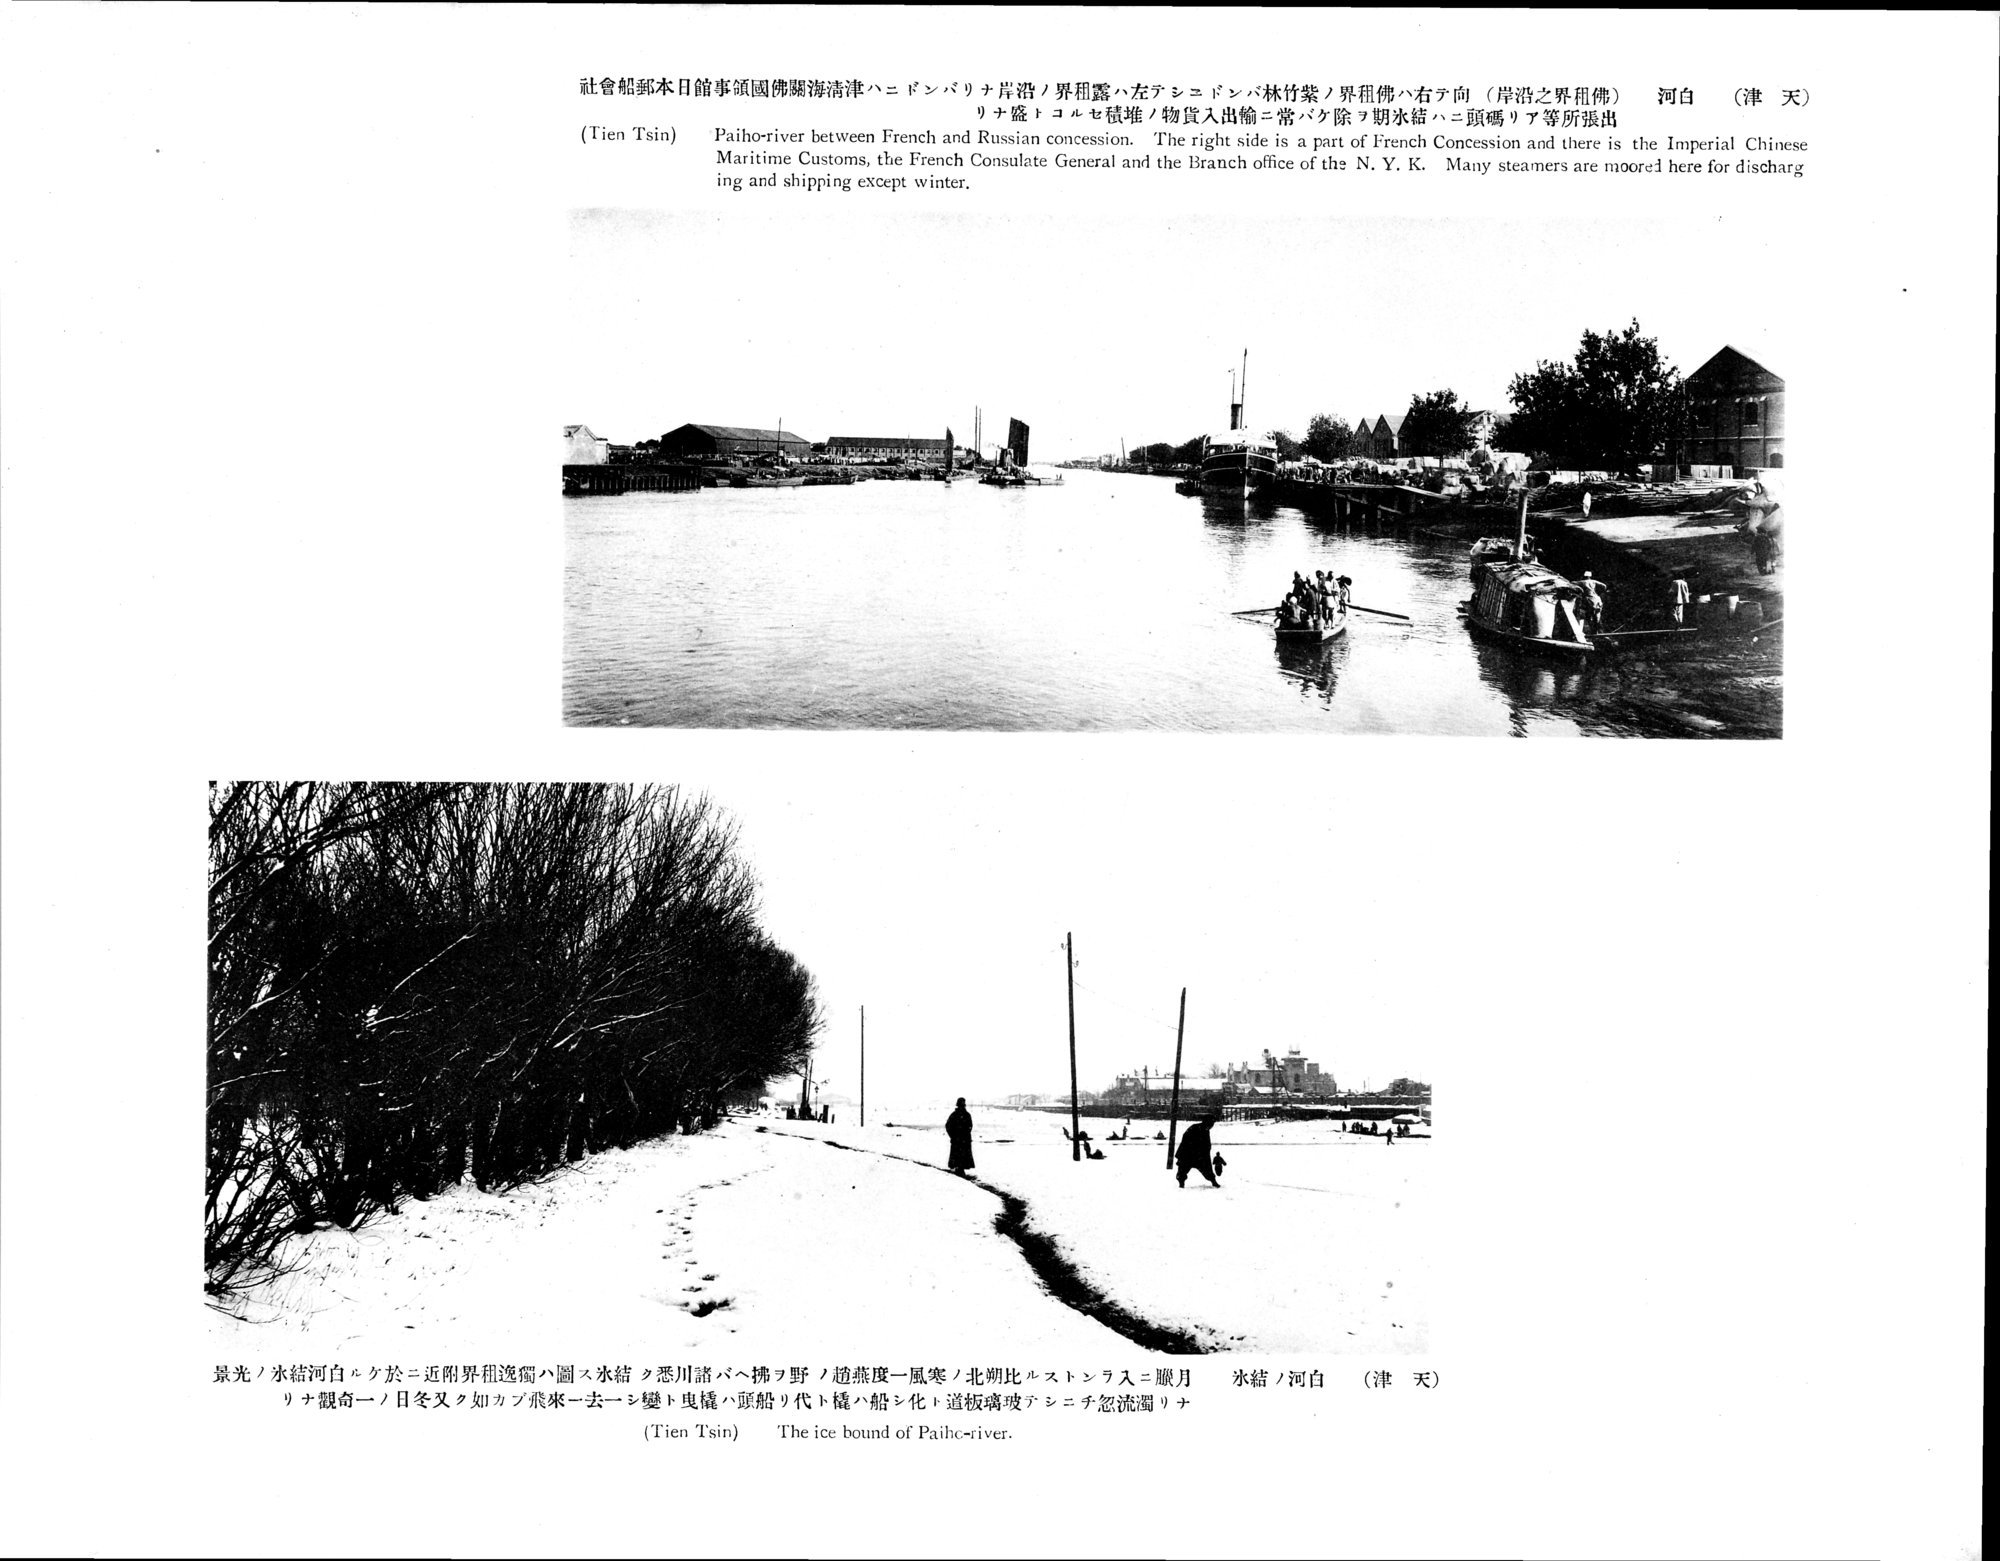 Views and Custom of North China : vol.1 / Page 45 (Grayscale High Resolution Image)